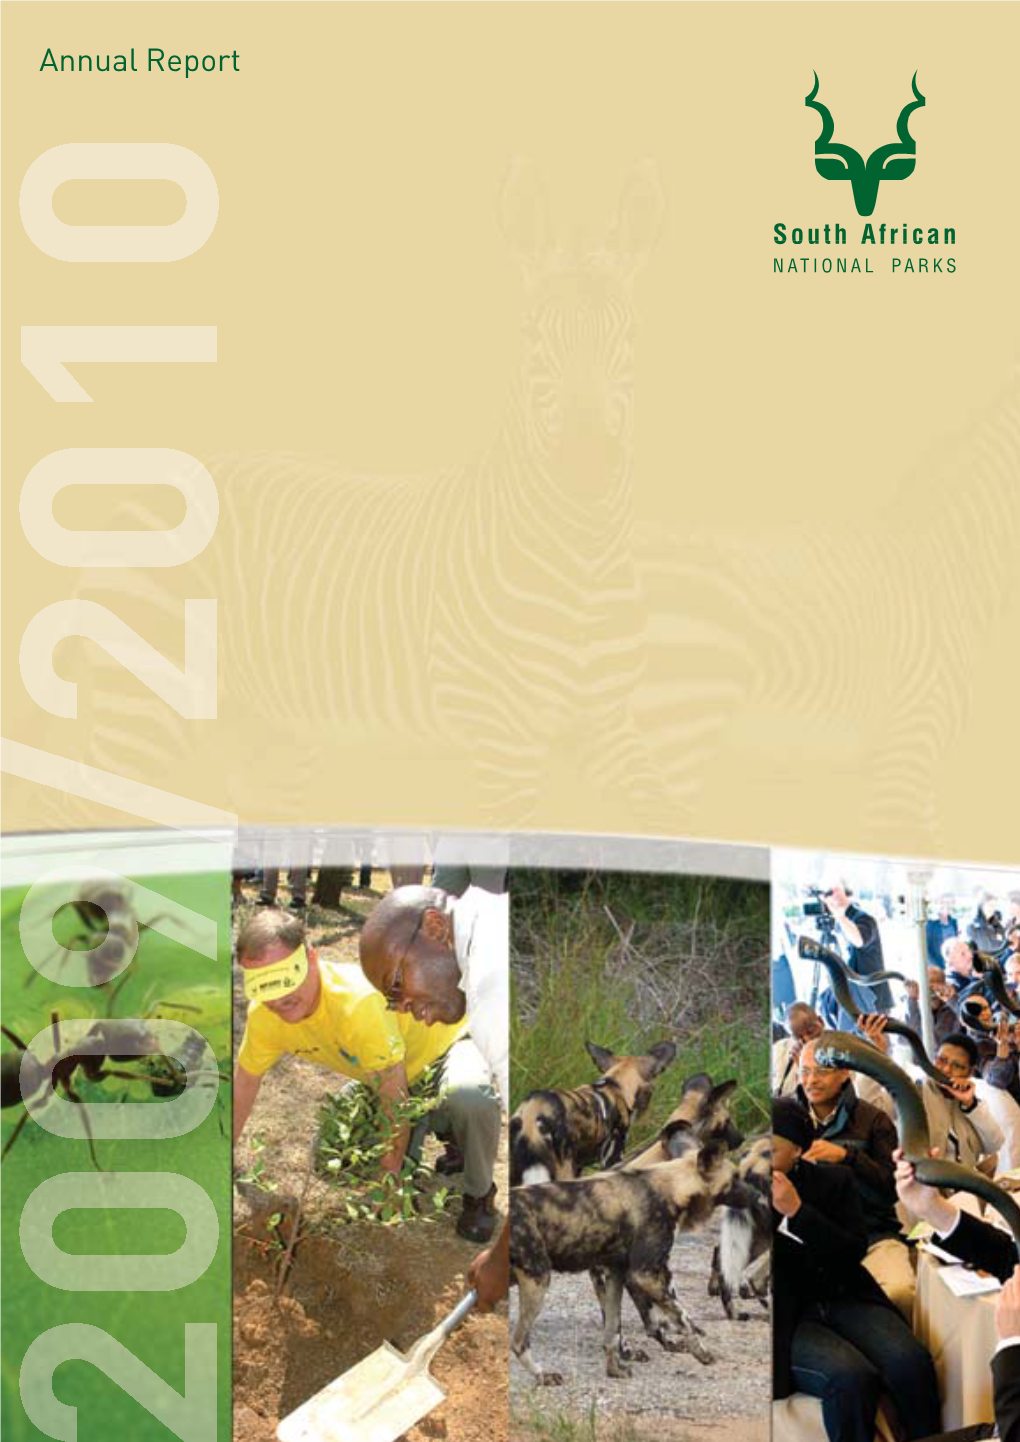 South African National Parks Annual Report 2010